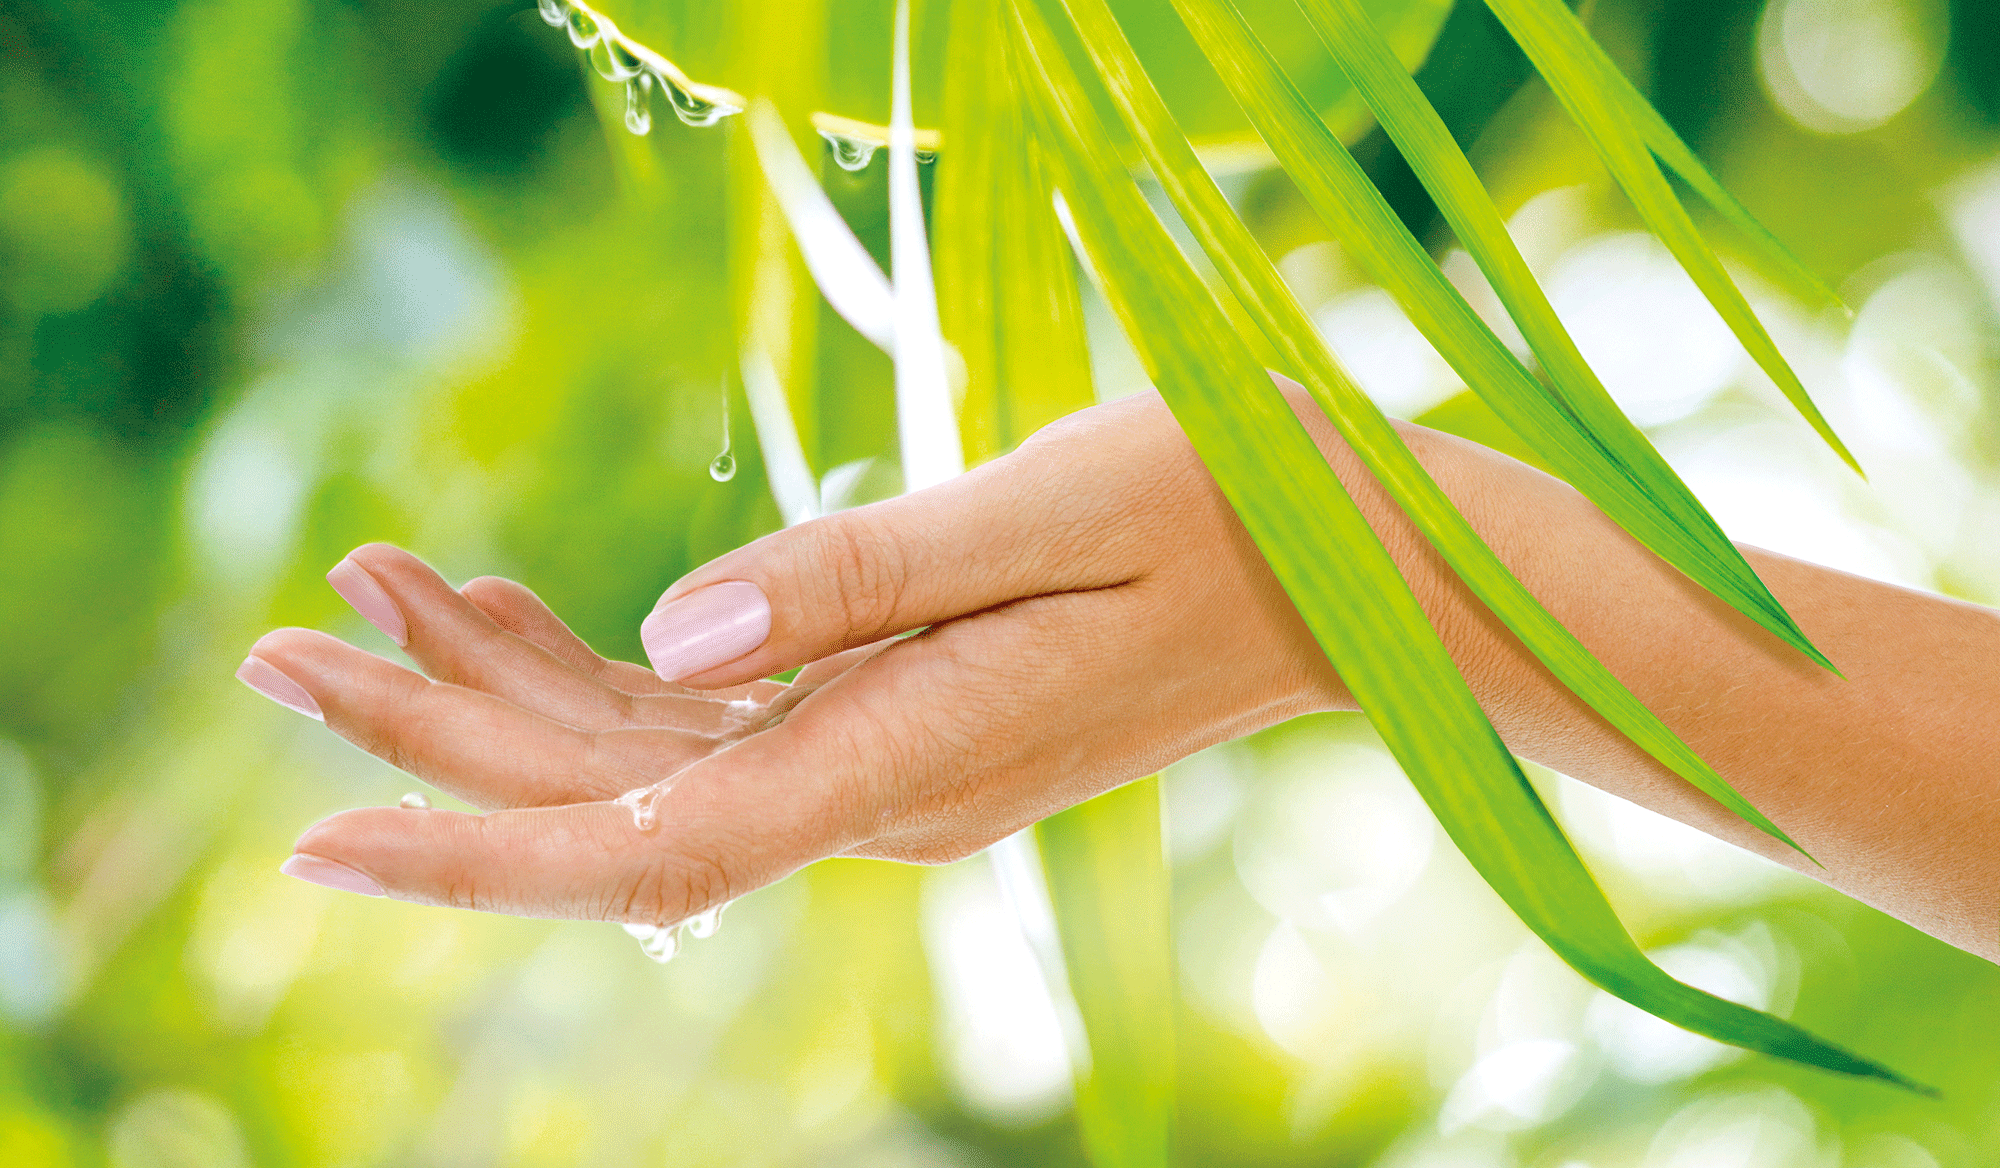 a hand touching palmtree leaves